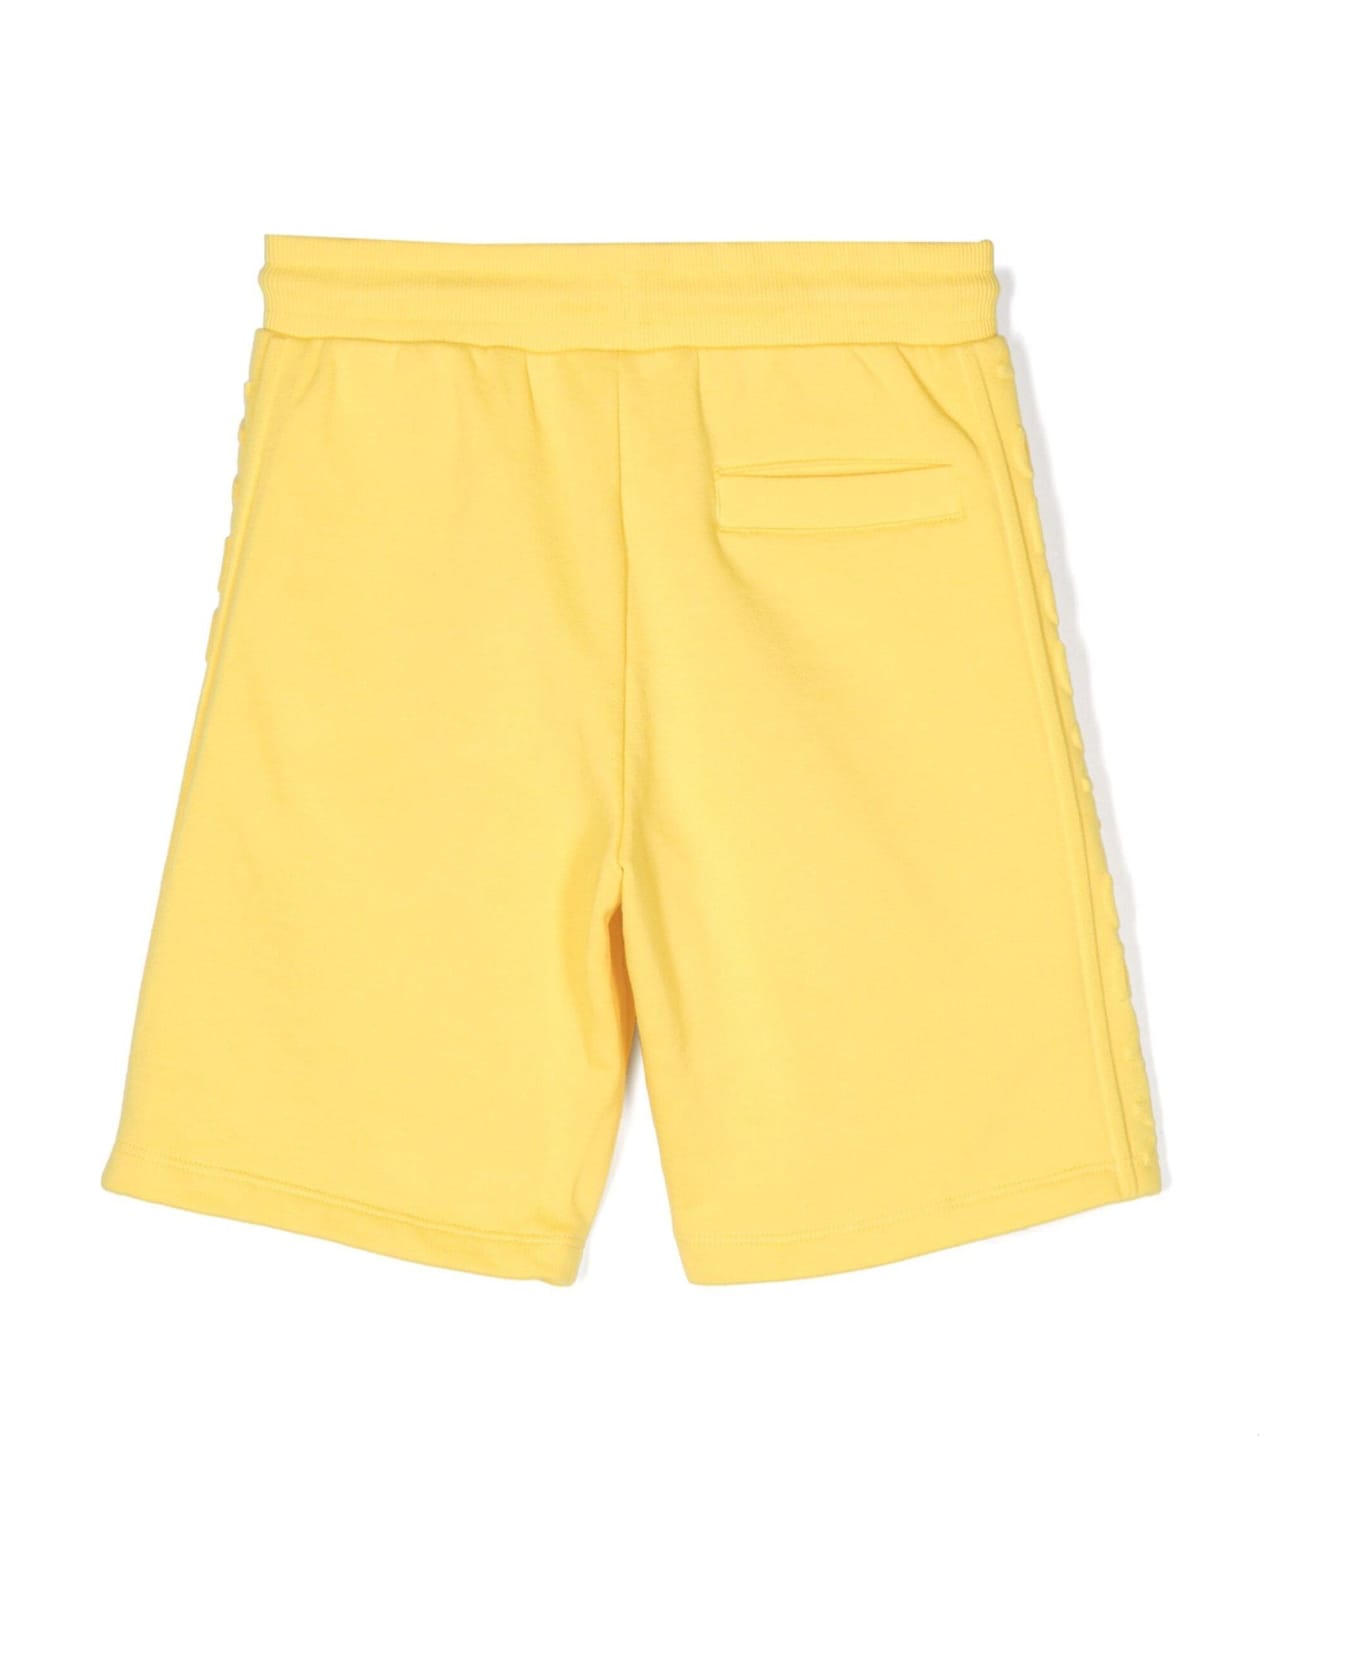 Marc Jacobs Shorts Yellow - Yellow